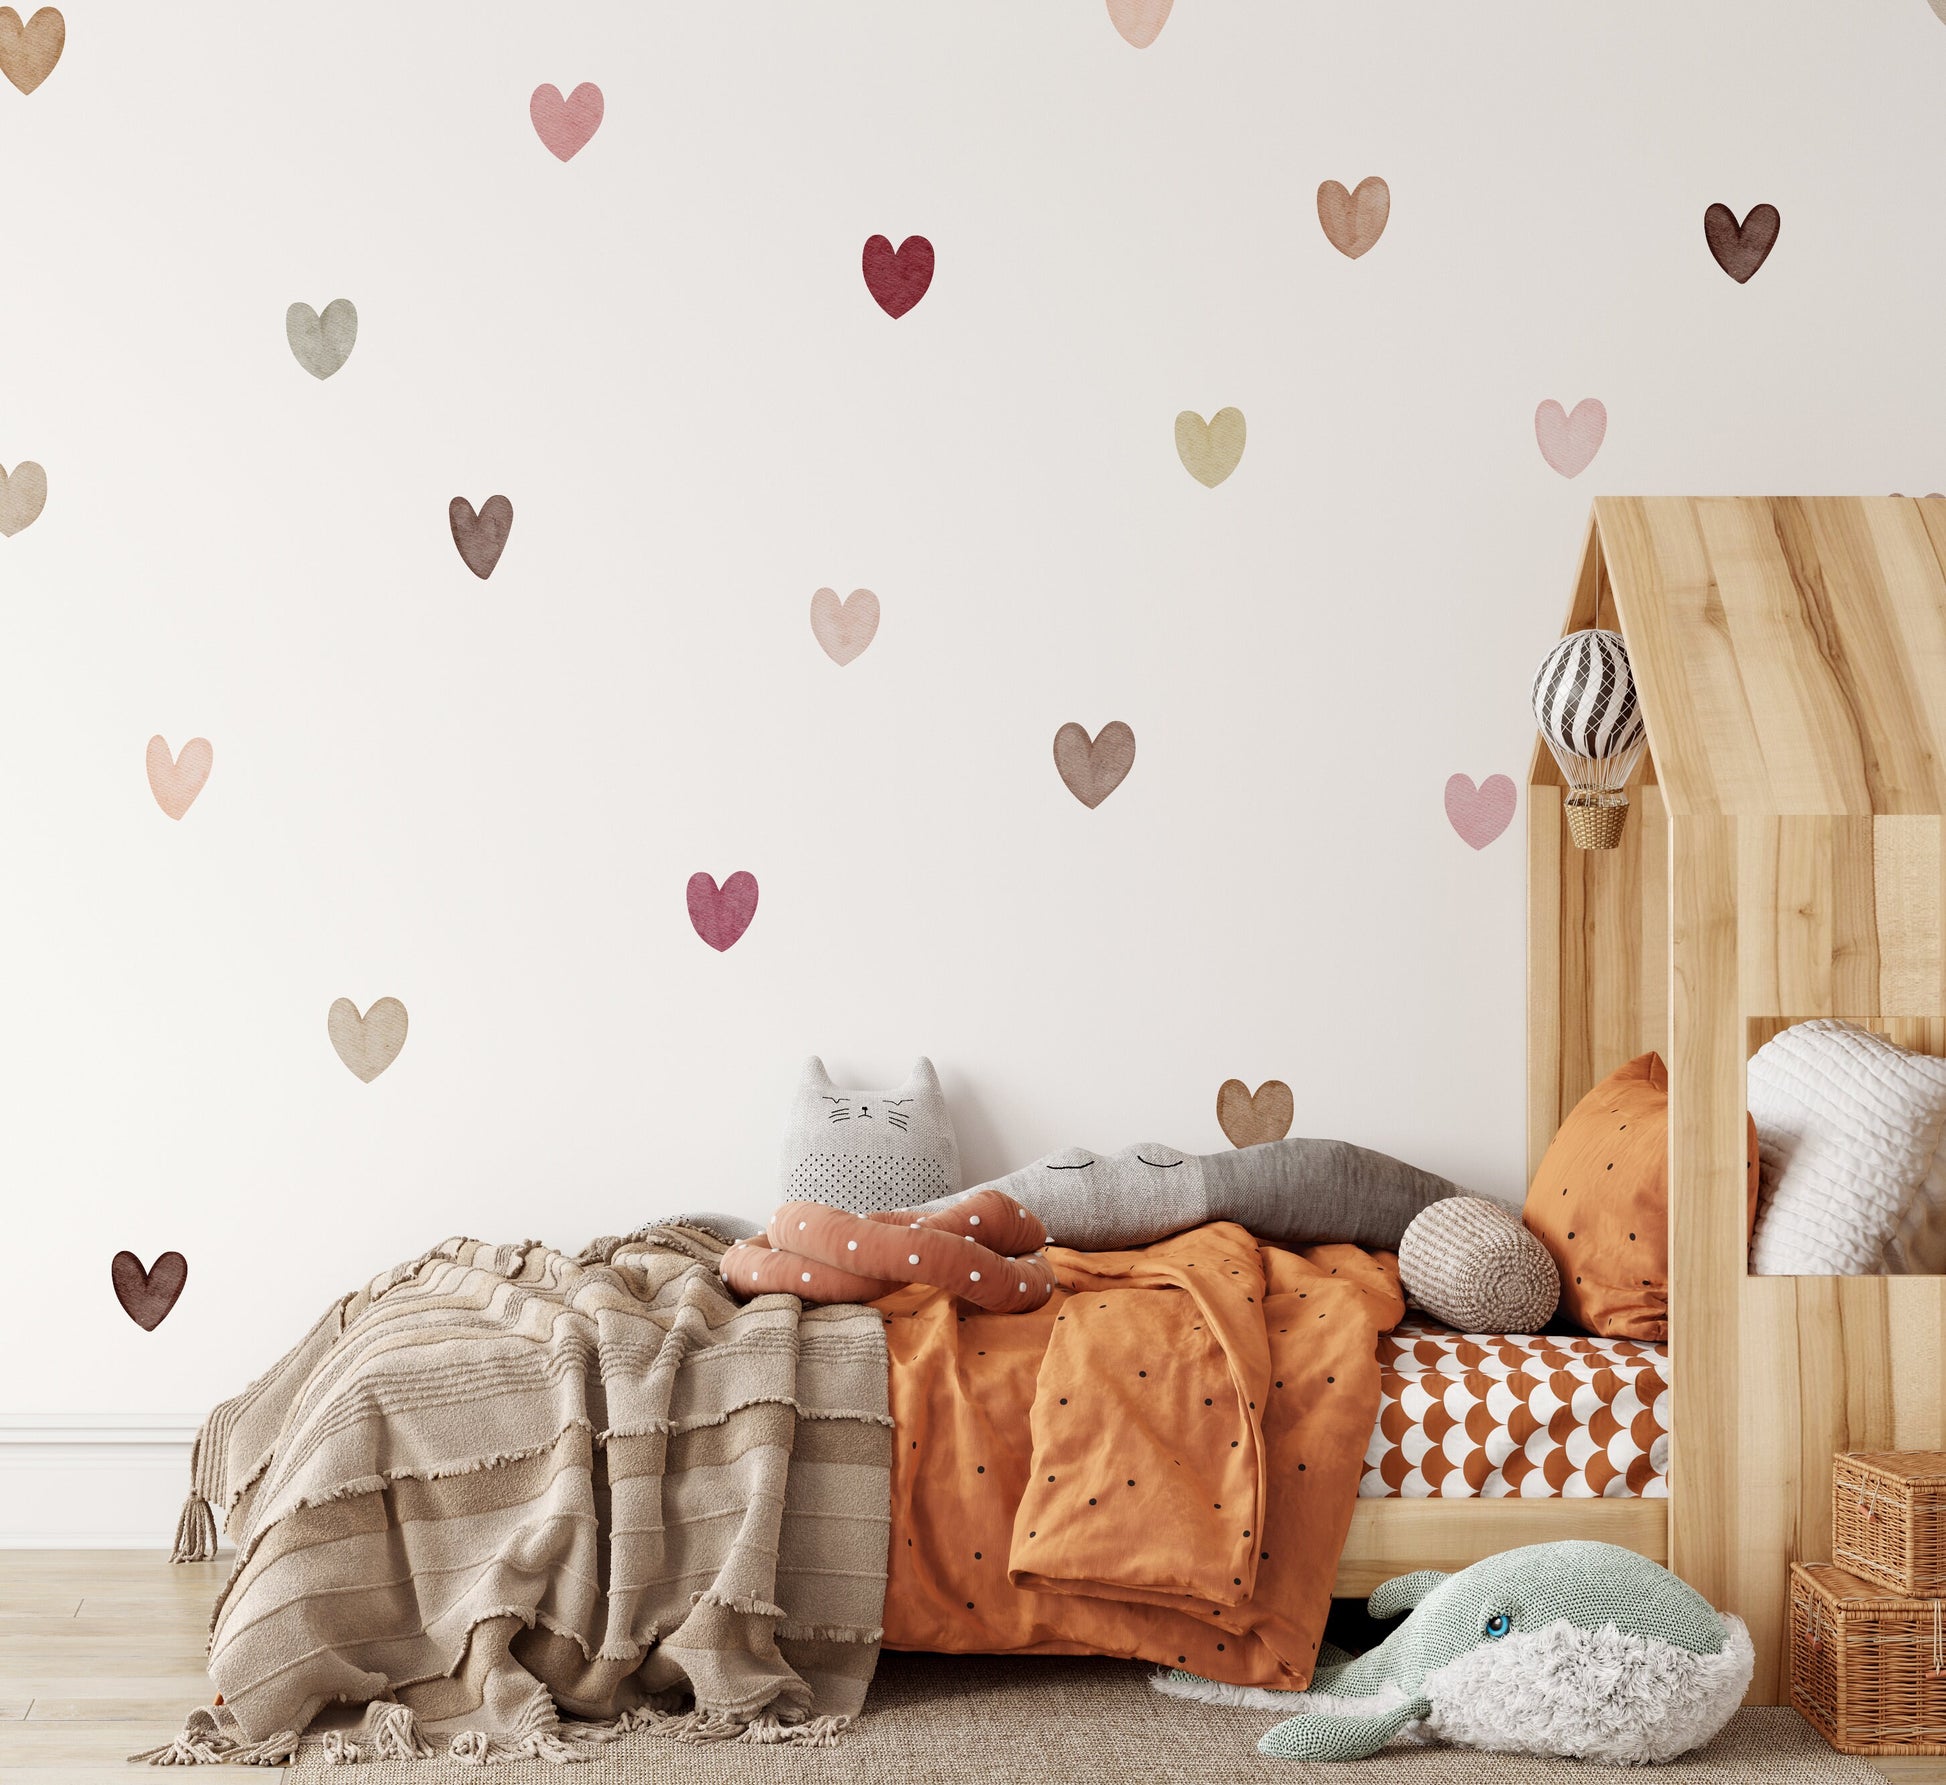 Large Boho Chic Heart Wall Stickers For Nursery Kids Bedrooms Children's Wall Decor Peel & Stick Removable